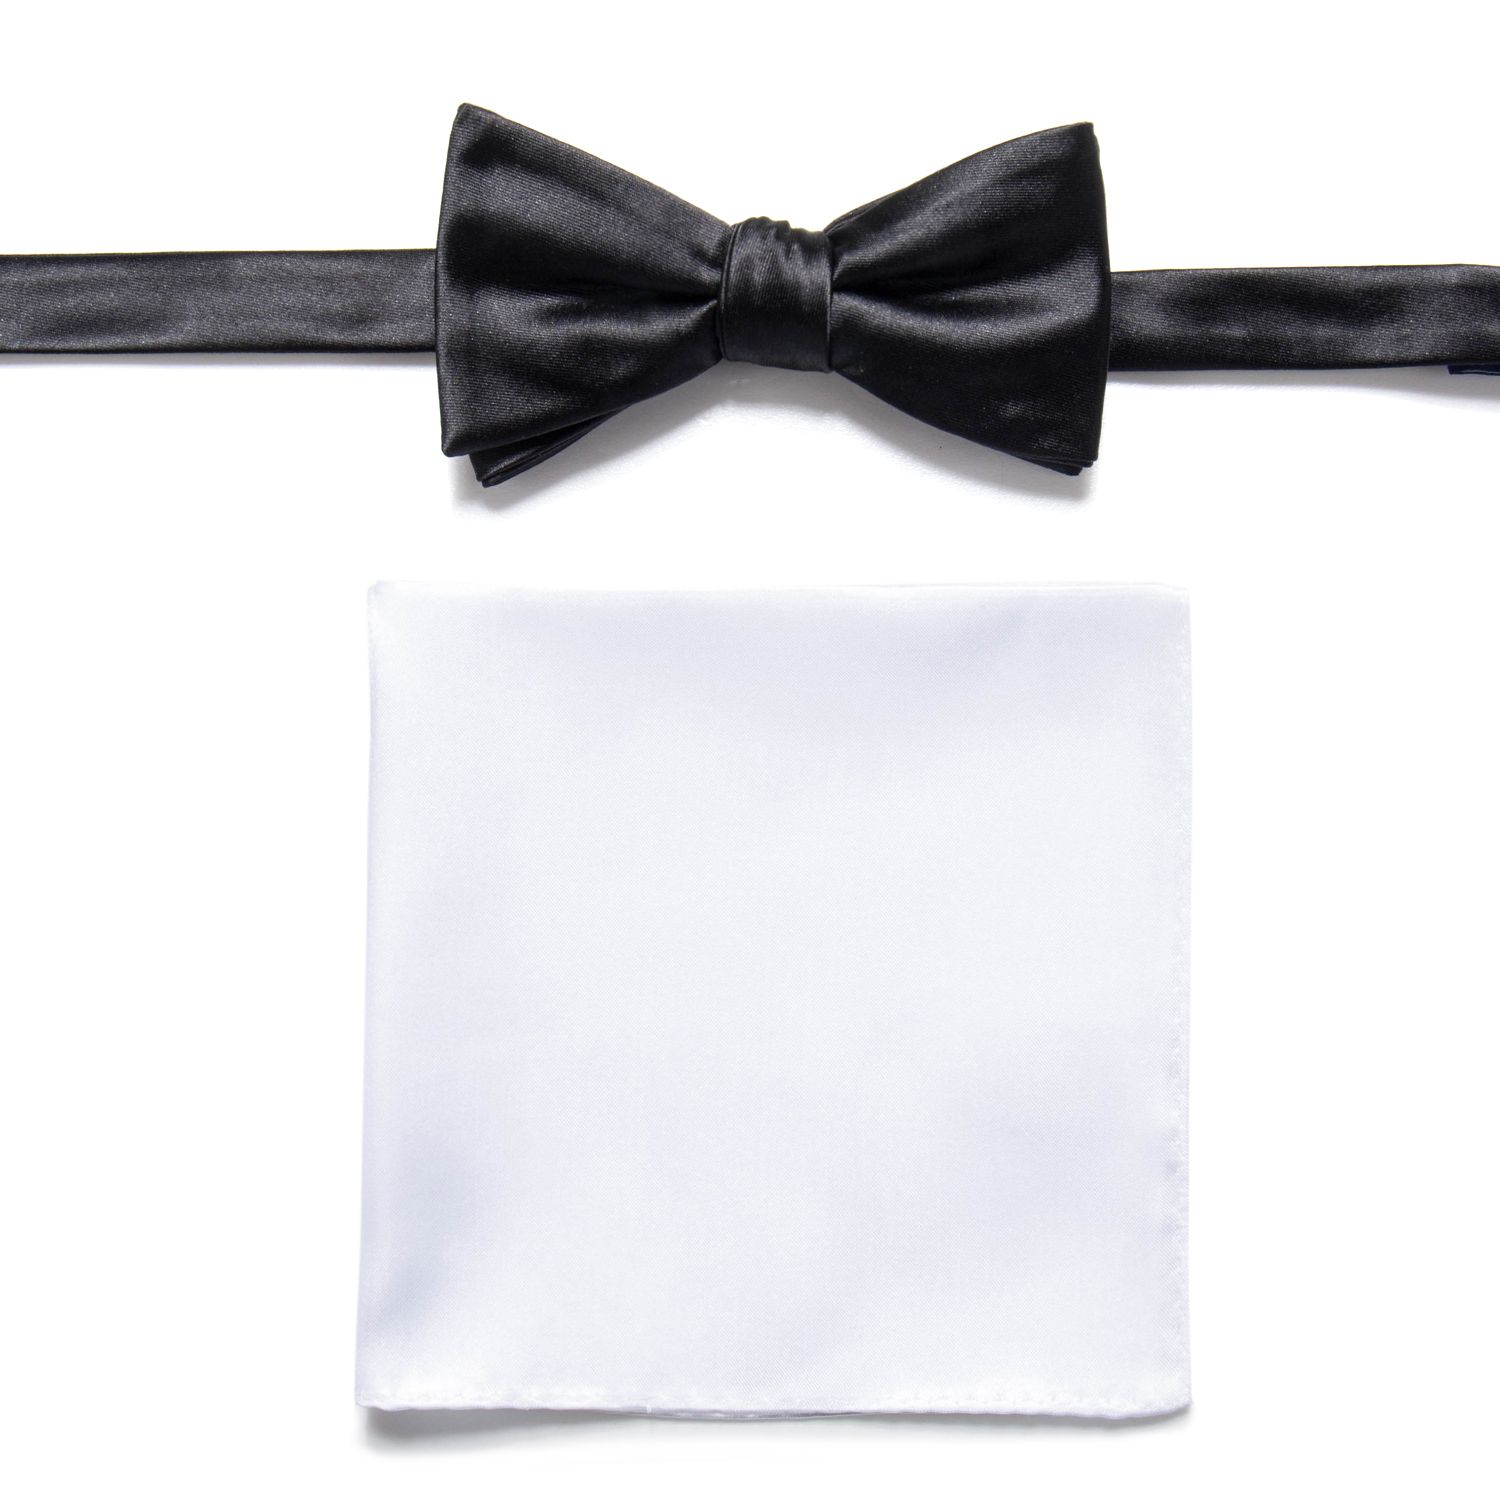 where to buy bow ties